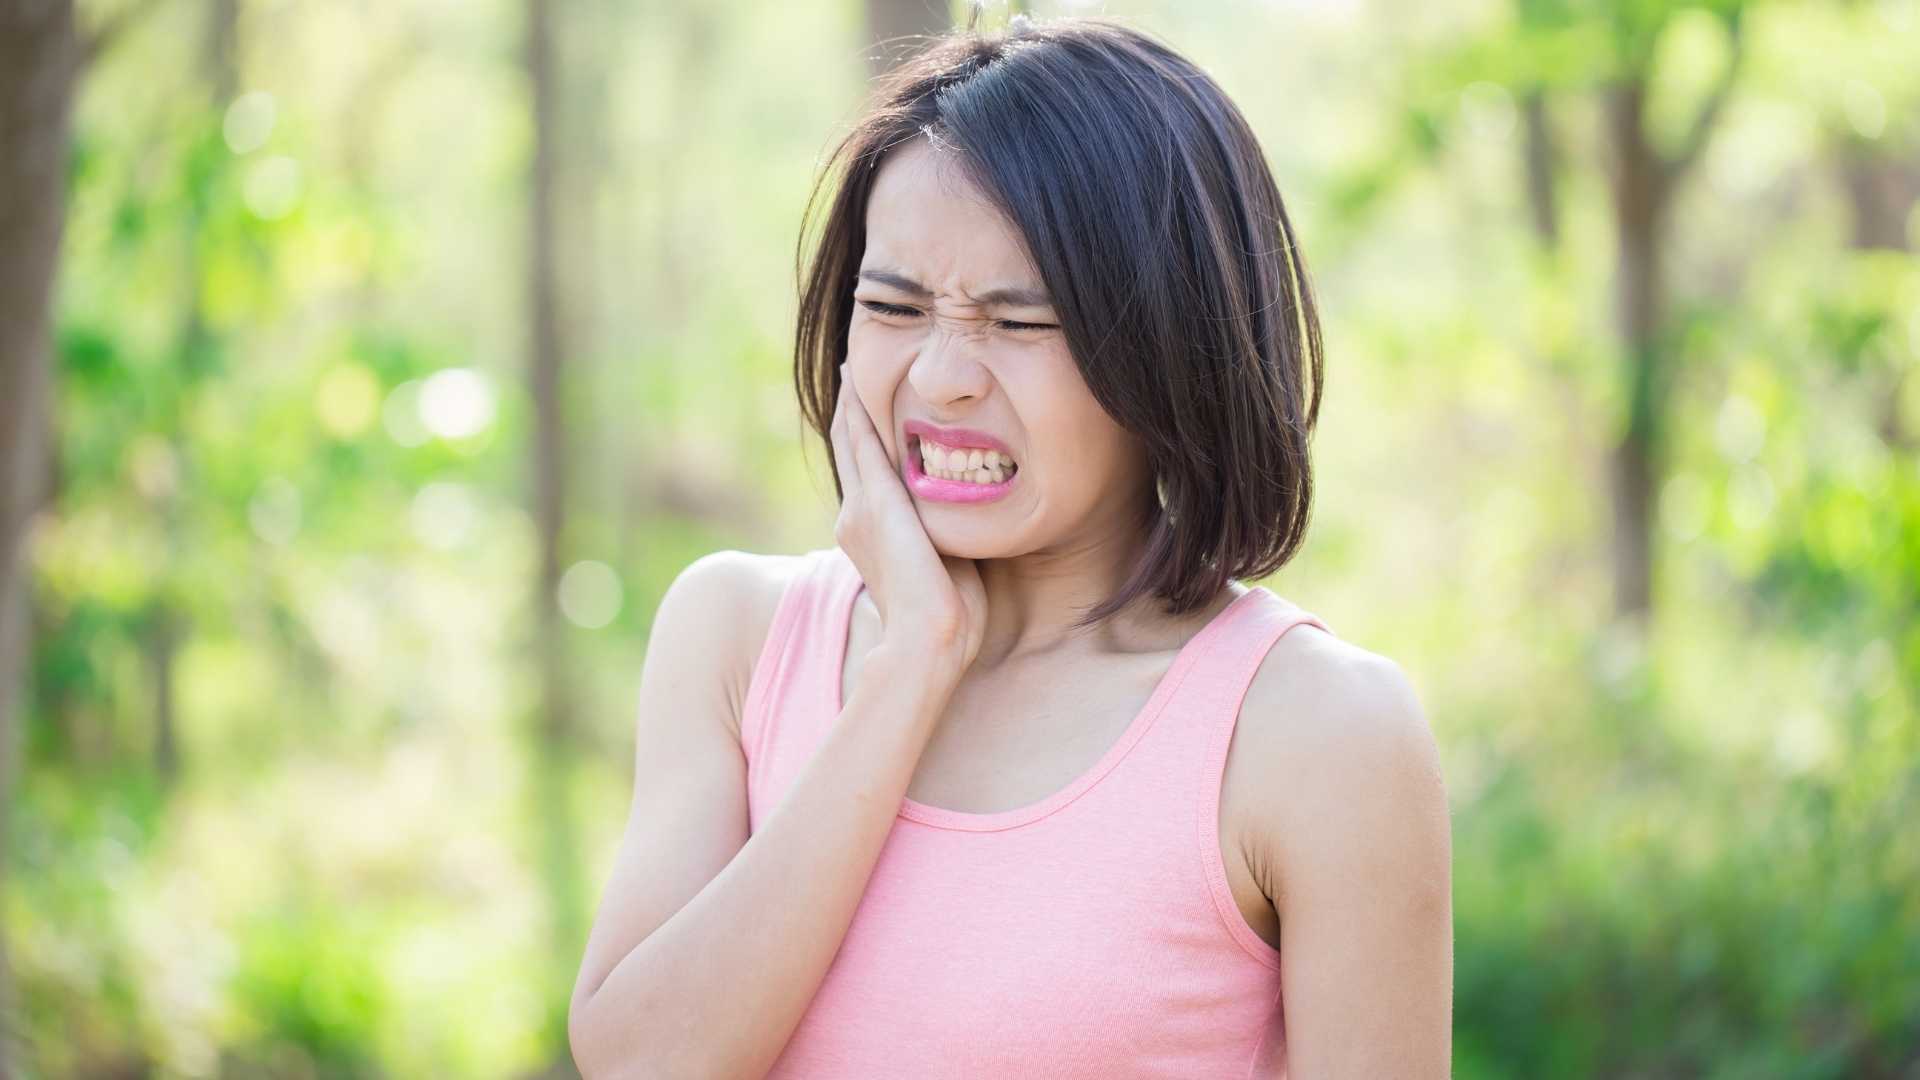 What are the common causes of dental emergencies?